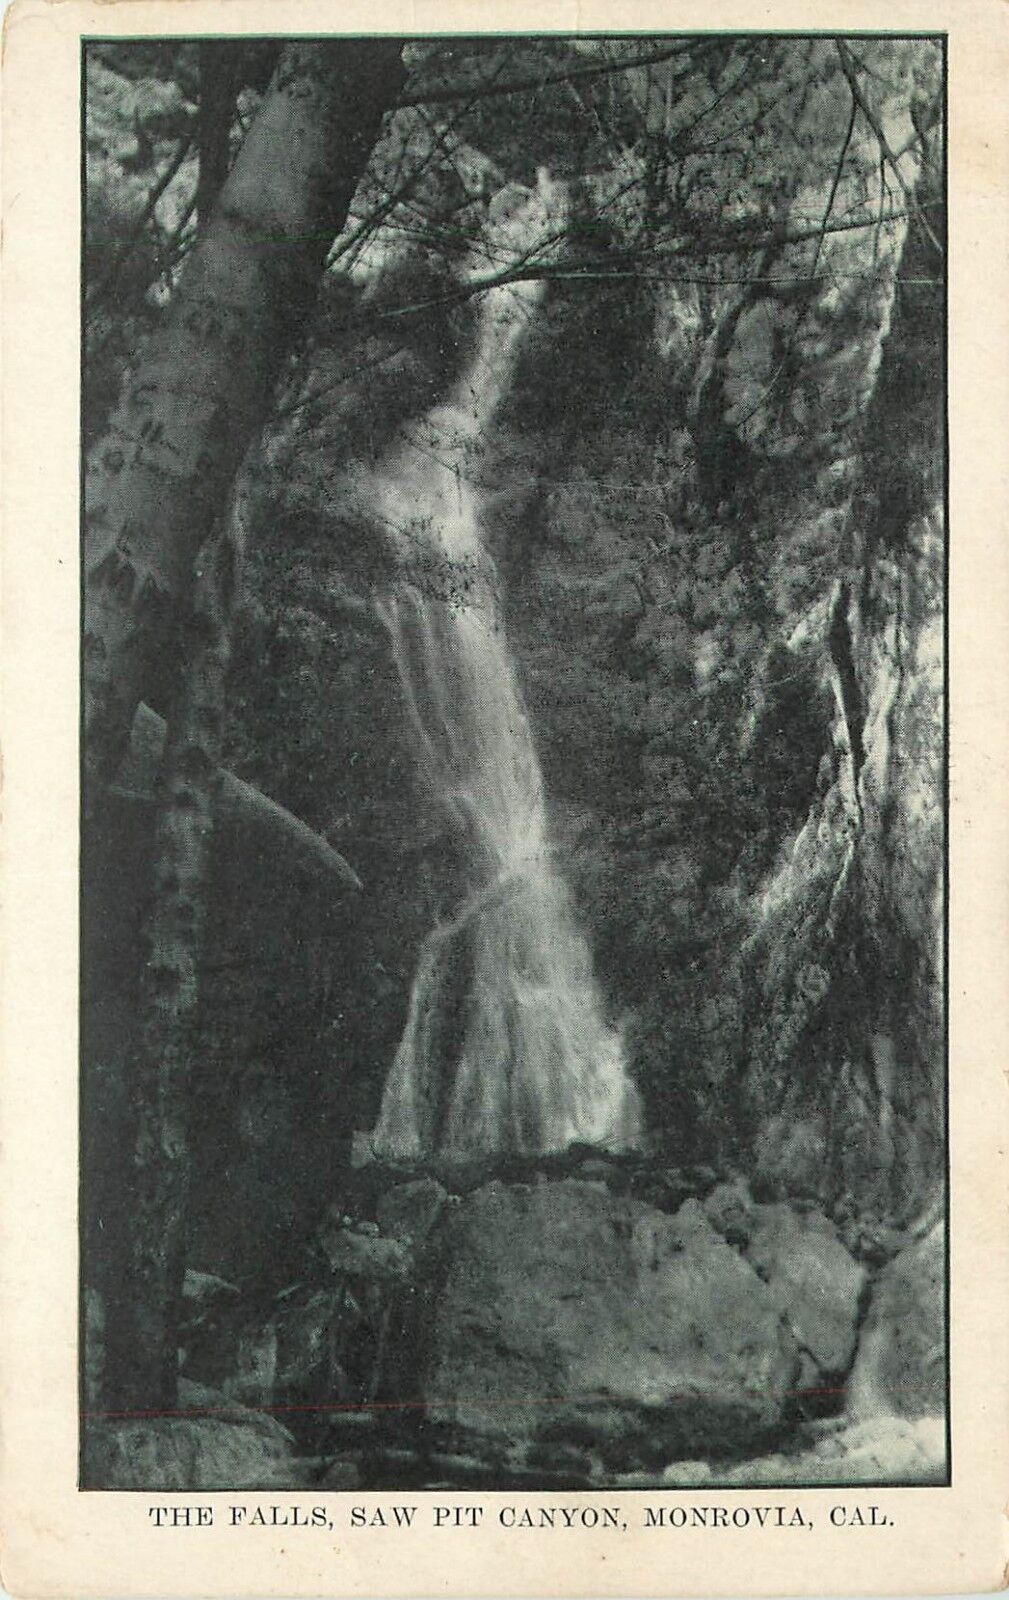 1912 Postcard Saw Pit Canyon Falls, Ad for Orr Cyclery 515 S. Myrtle Monrovia CA